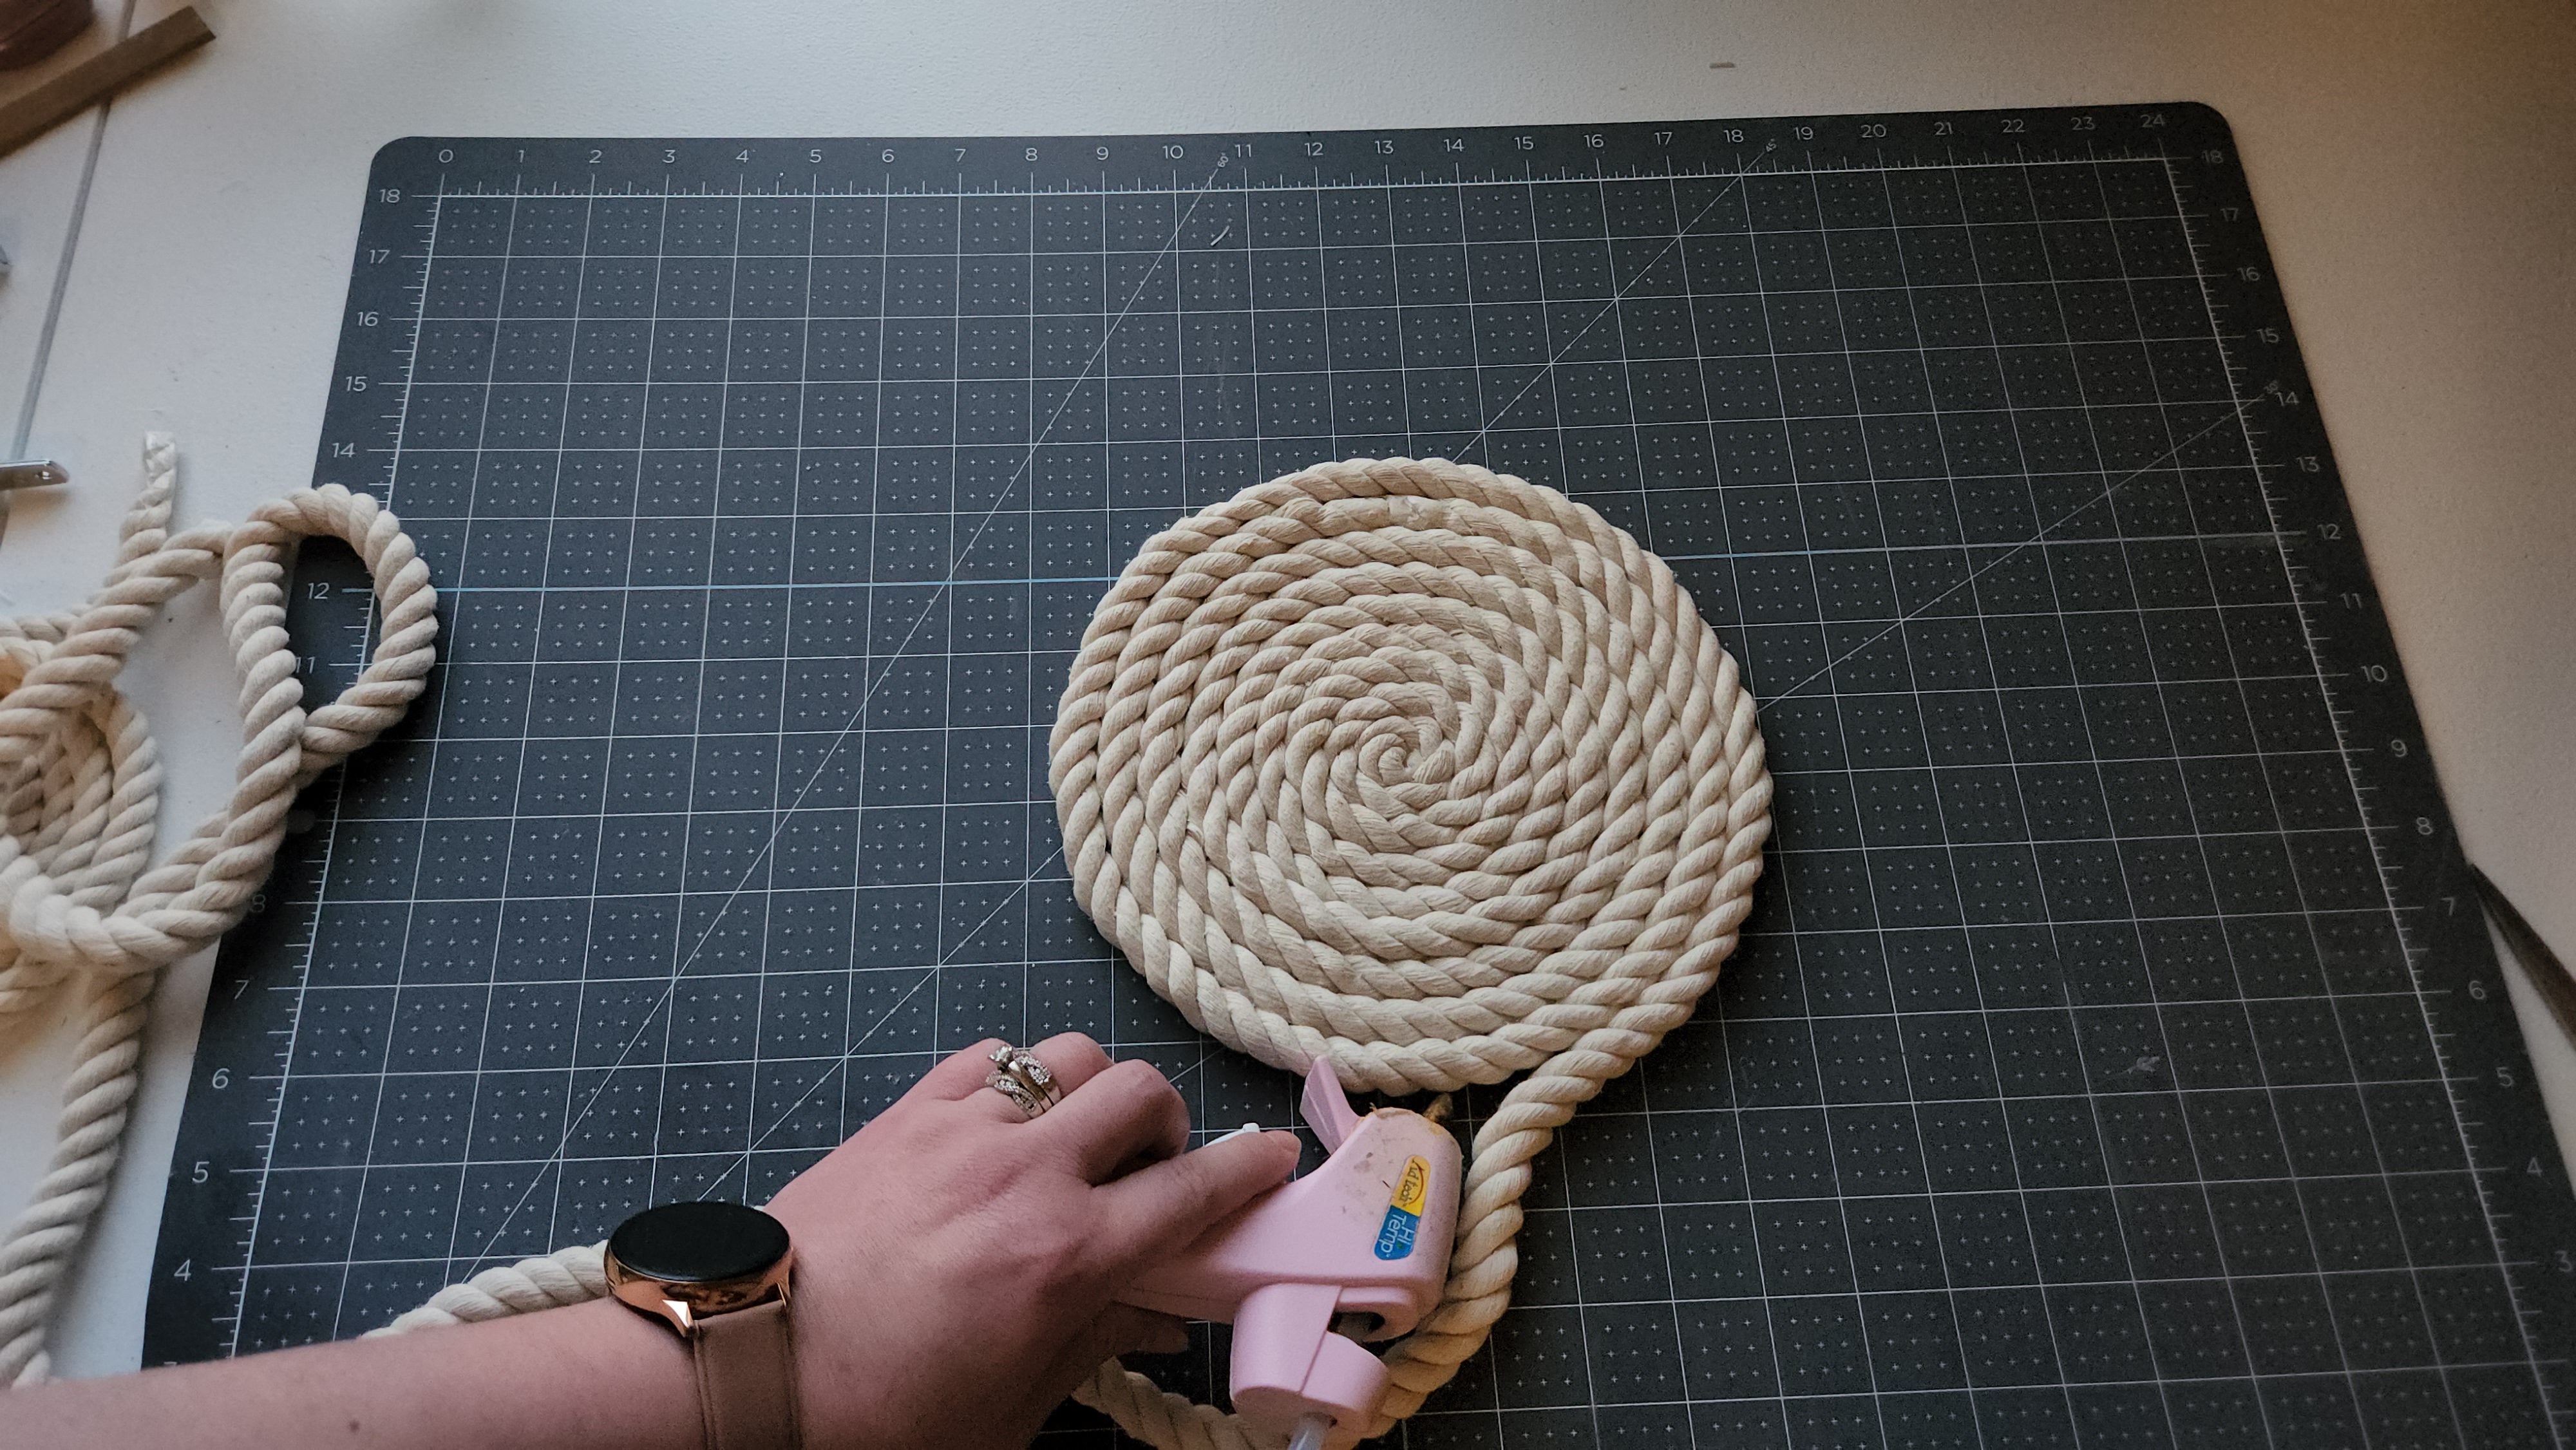 Adding hot glue to the edge of the cotton rope that's forming the rope placemat to roll the rest of the rope on it.